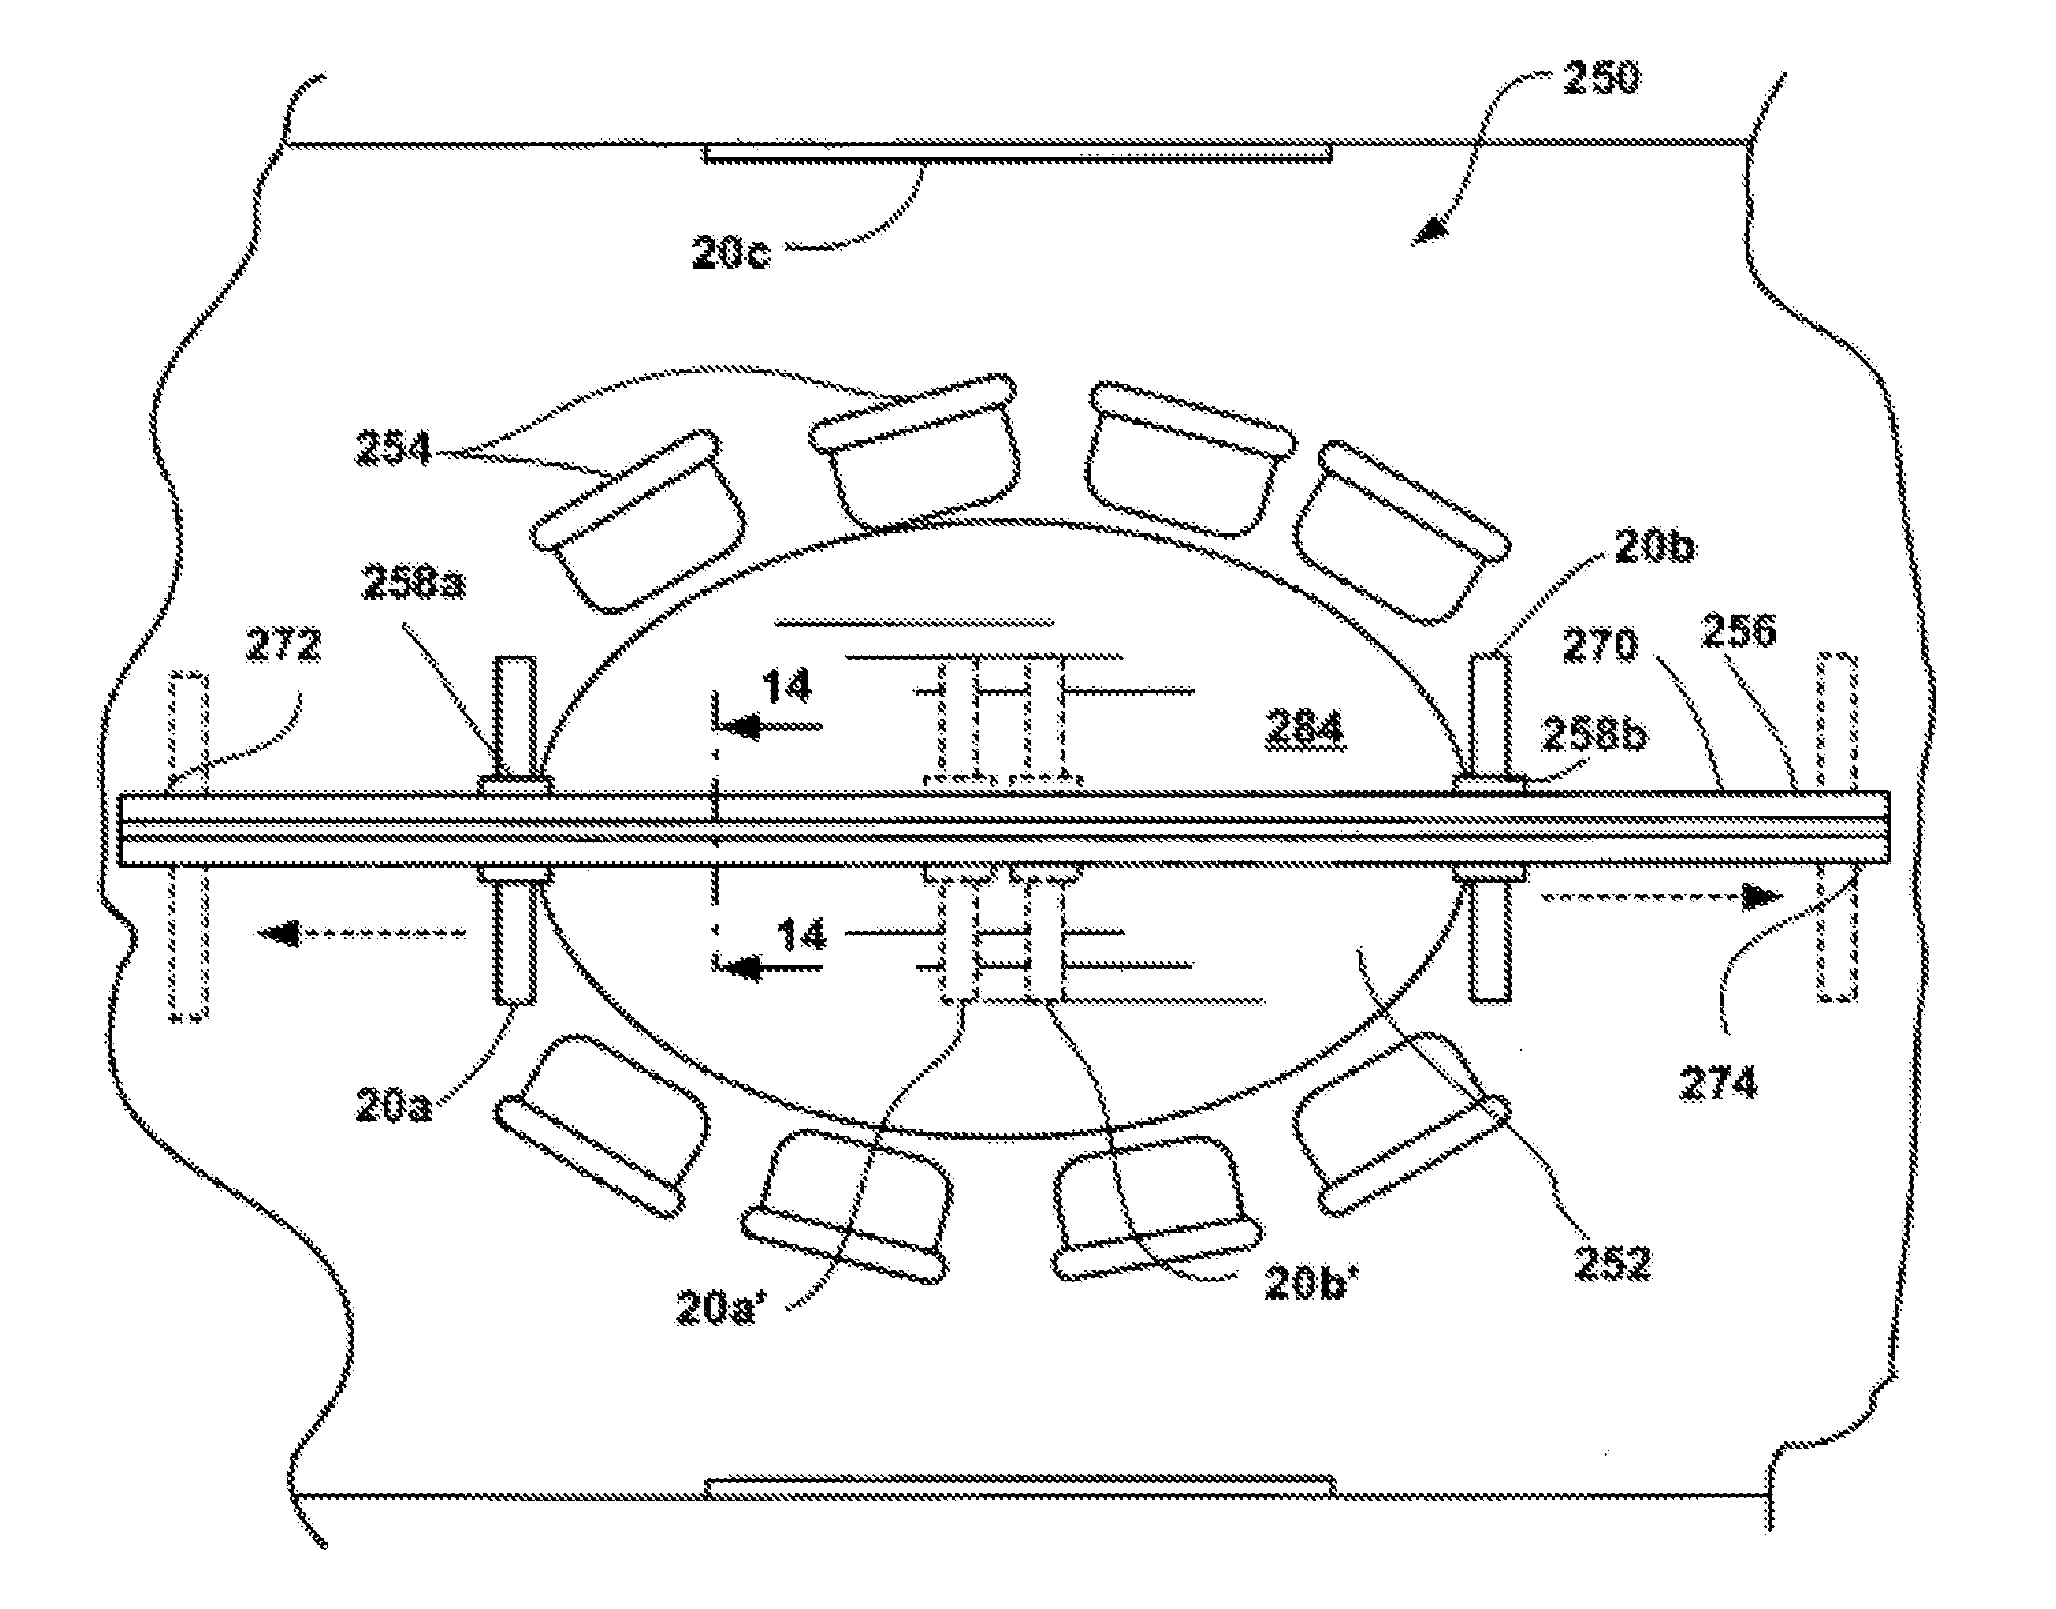 Multi-Use Conferencing Space, Table Arrangement And Display Configuration